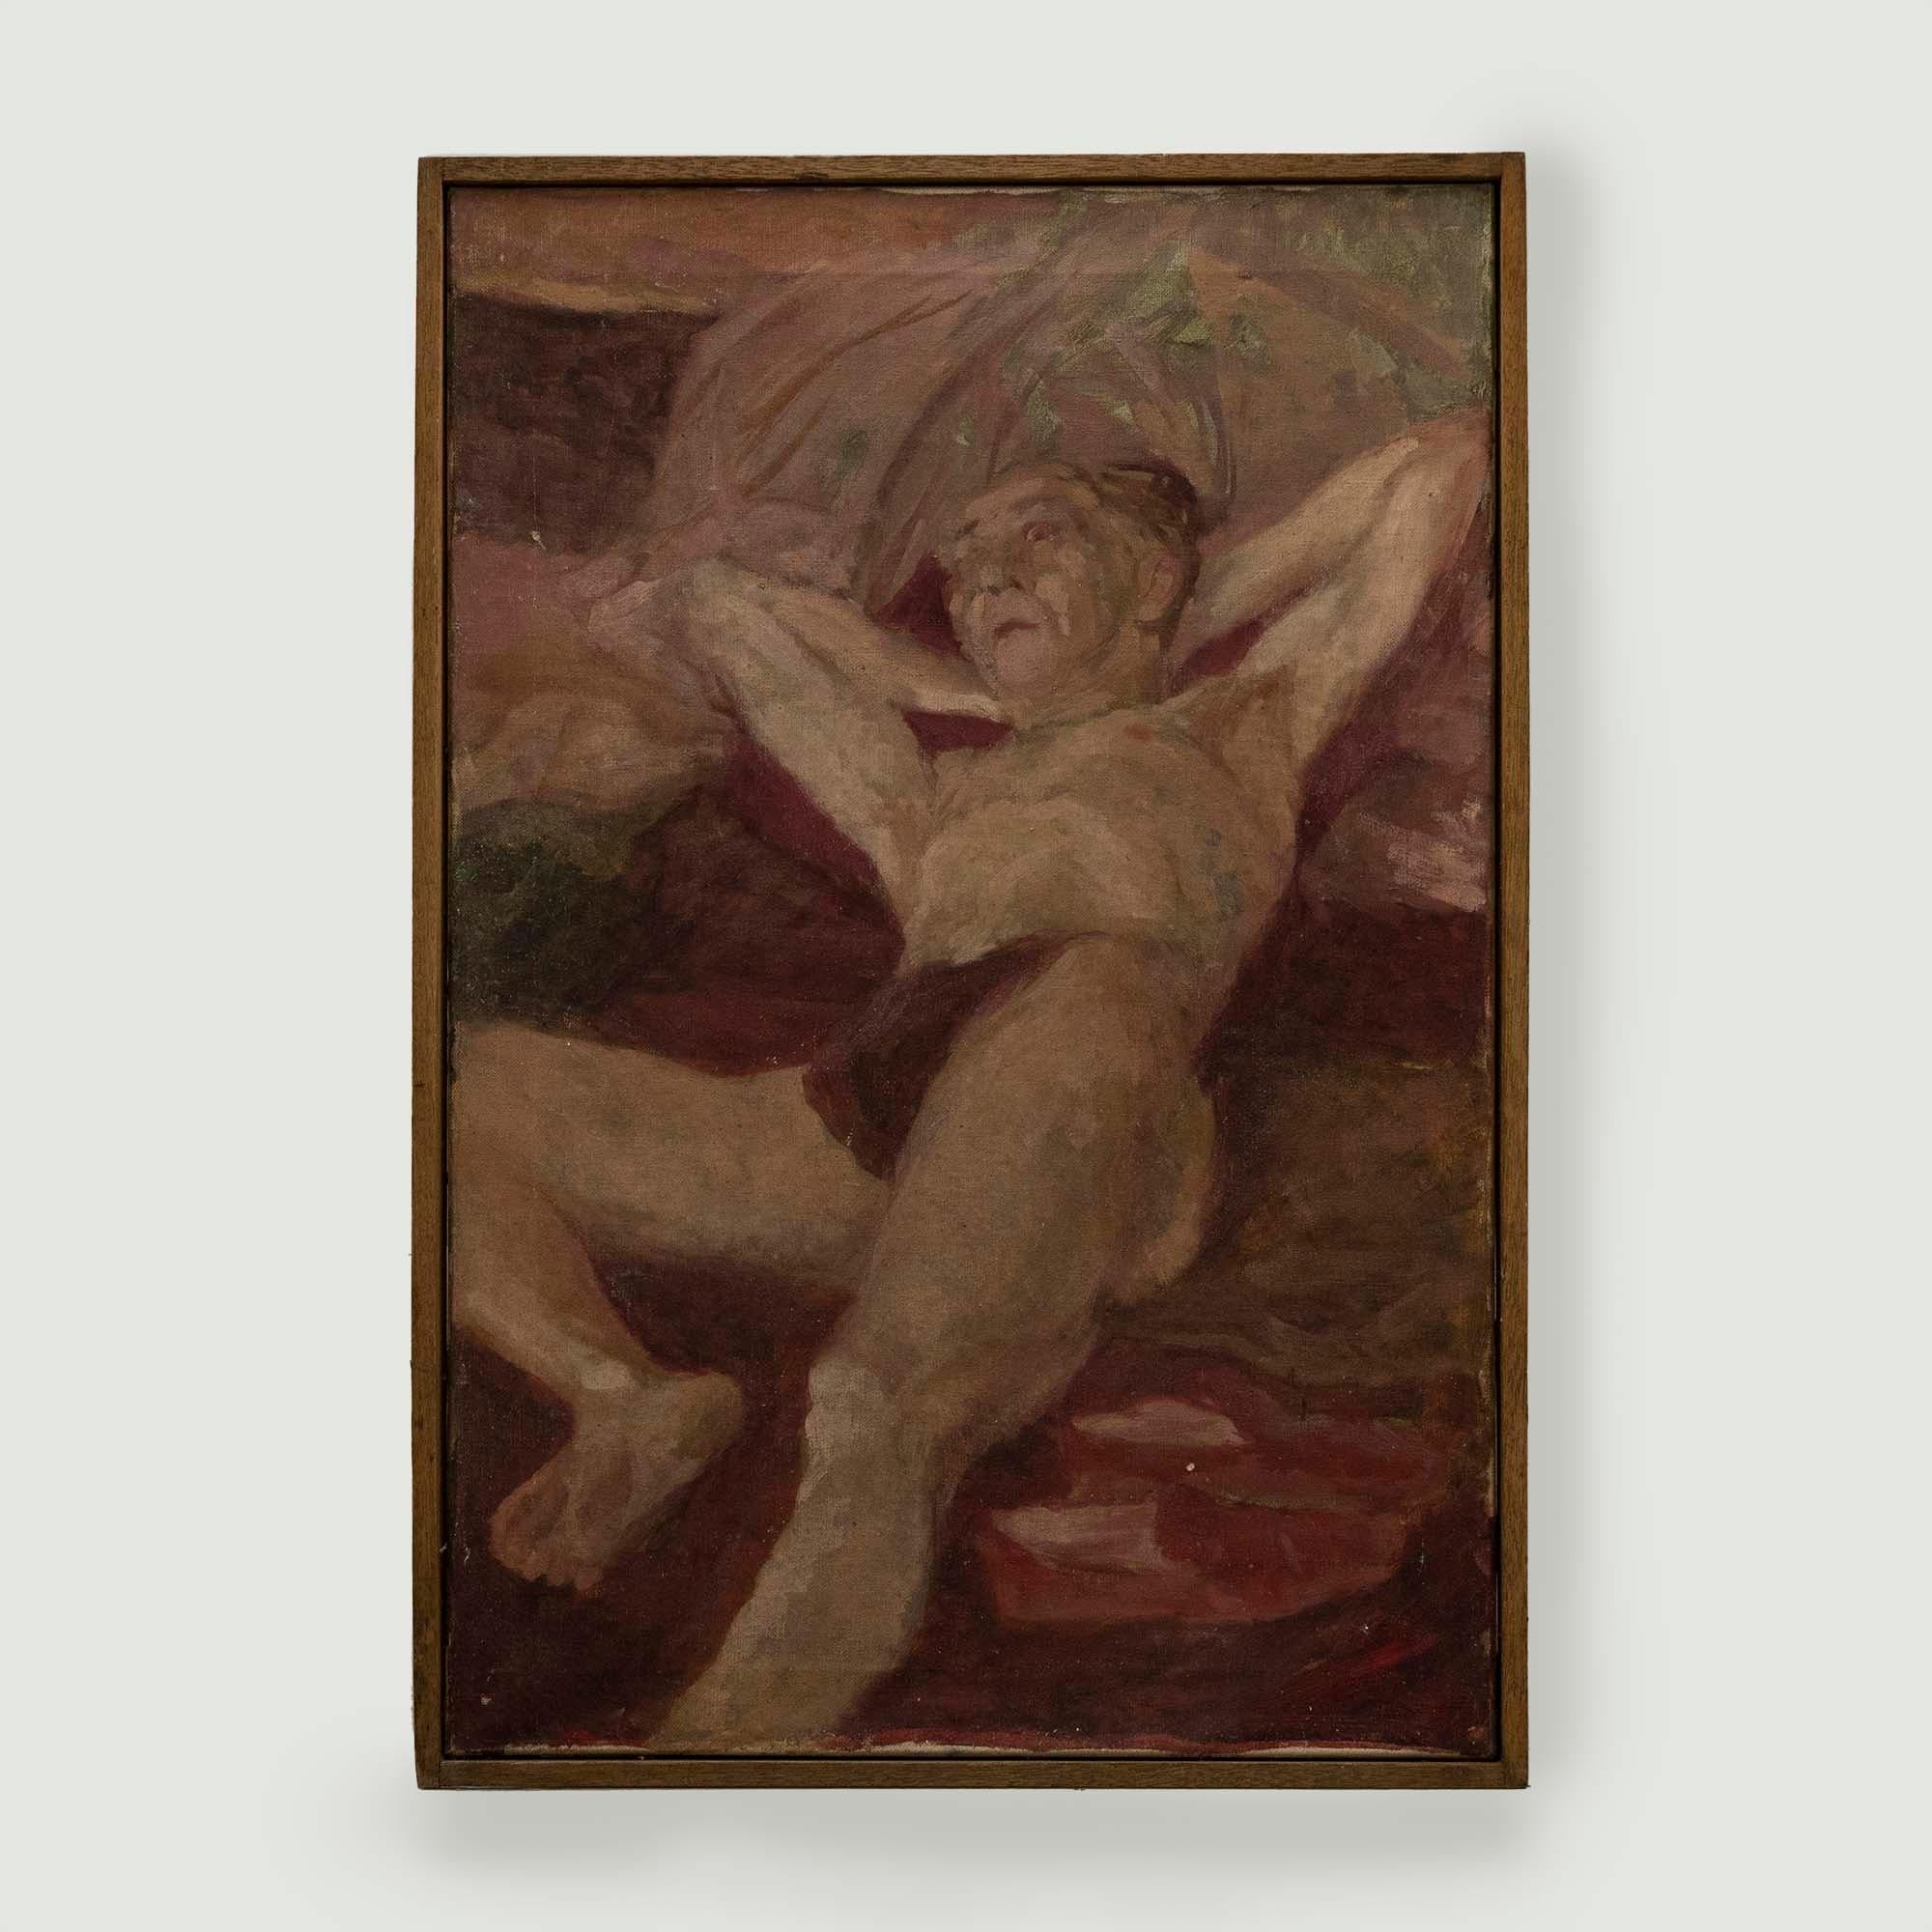 A striking study depicting a reclining male model with his hands behind his head. The artist captures the scene in warm tones with soft reds and pinks making up the man's lean body. Unsigned. Presented in a slim hard wood frame. On canvas.